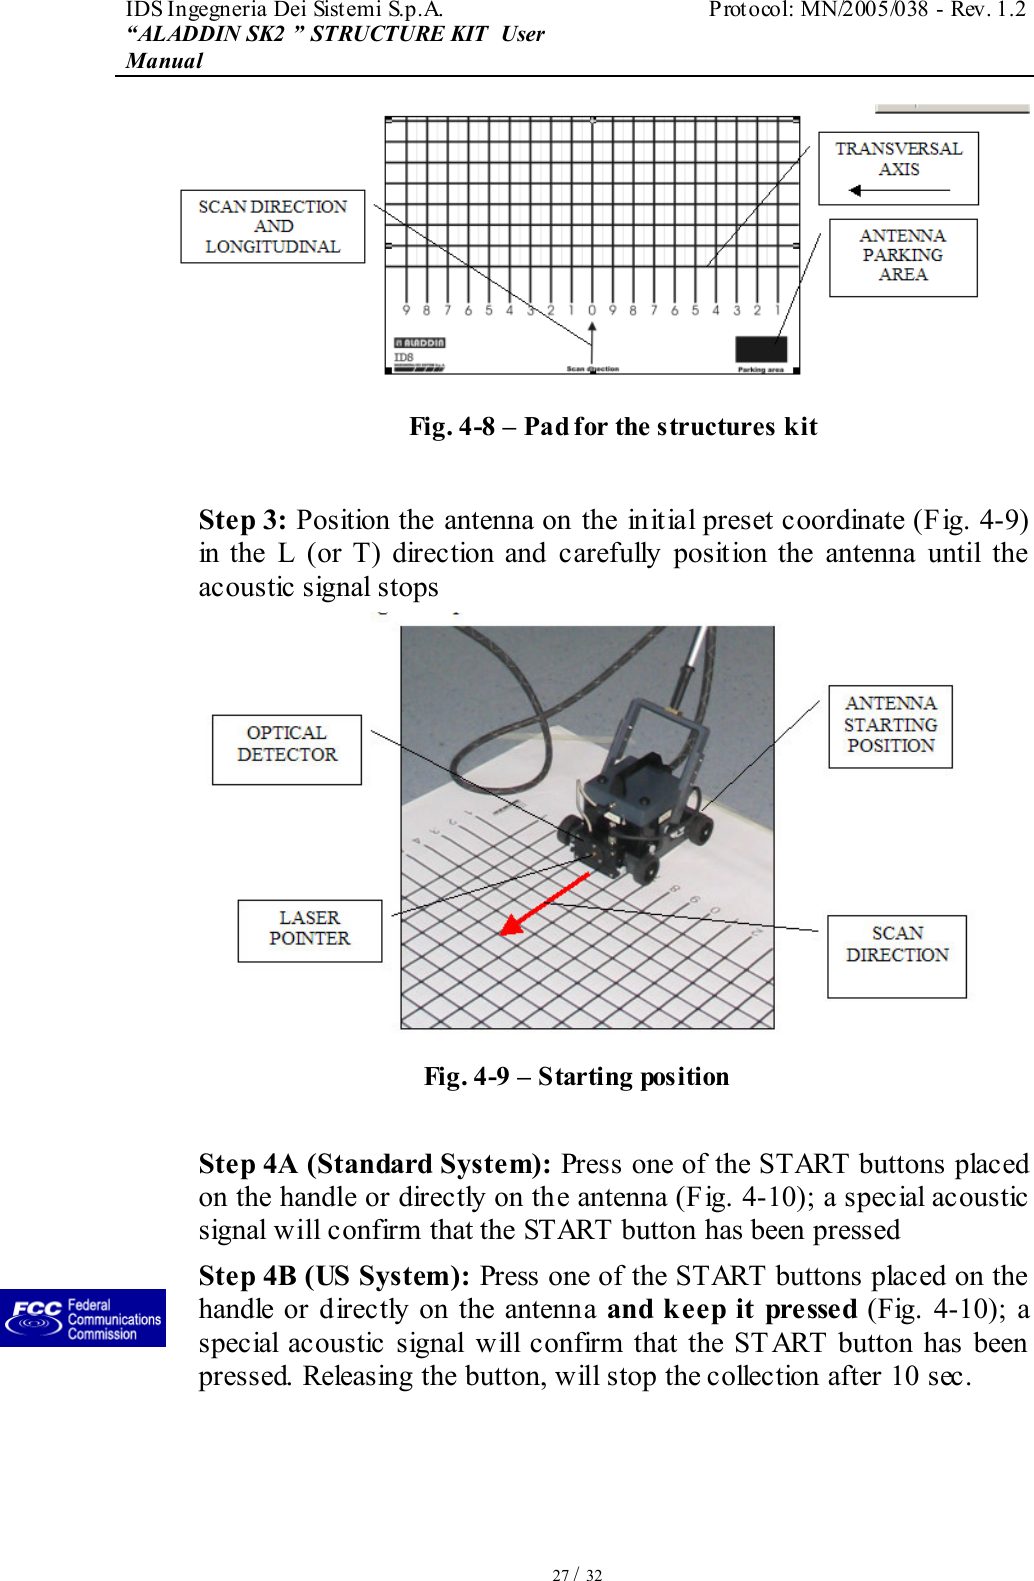 IDS Ingegneria Dei Sistemi S.p.A.  Protocol: MN/2005/038 - Rev. 1.2 “ALADDIN SK2 ” STRUCTURE KIT  User Manual   27 / 32  Fig. 4-8 – Pad for the structures kit  Step 3: Position the antenna on the initial preset coordinate (Fig. 4-9) in the L (or  T)  direction and carefully position the antenna  until  the acoustic signal stops  Fig. 4-9 – Starting position  Step 4A (Standard System): Press one of the START buttons placed on the handle or directly on the antenna (Fig. 4-10); a special acoustic signal will confirm that the START button has been pressed Step 4B (US System): Press one of the START buttons placed on the handle or  directly  on  the antenna  and keep  it pressed (Fig.  4-10); a special acoustic signal  will confirm  that the START  button has been pressed. Releasing the button, will stop the collection after 10 sec.   